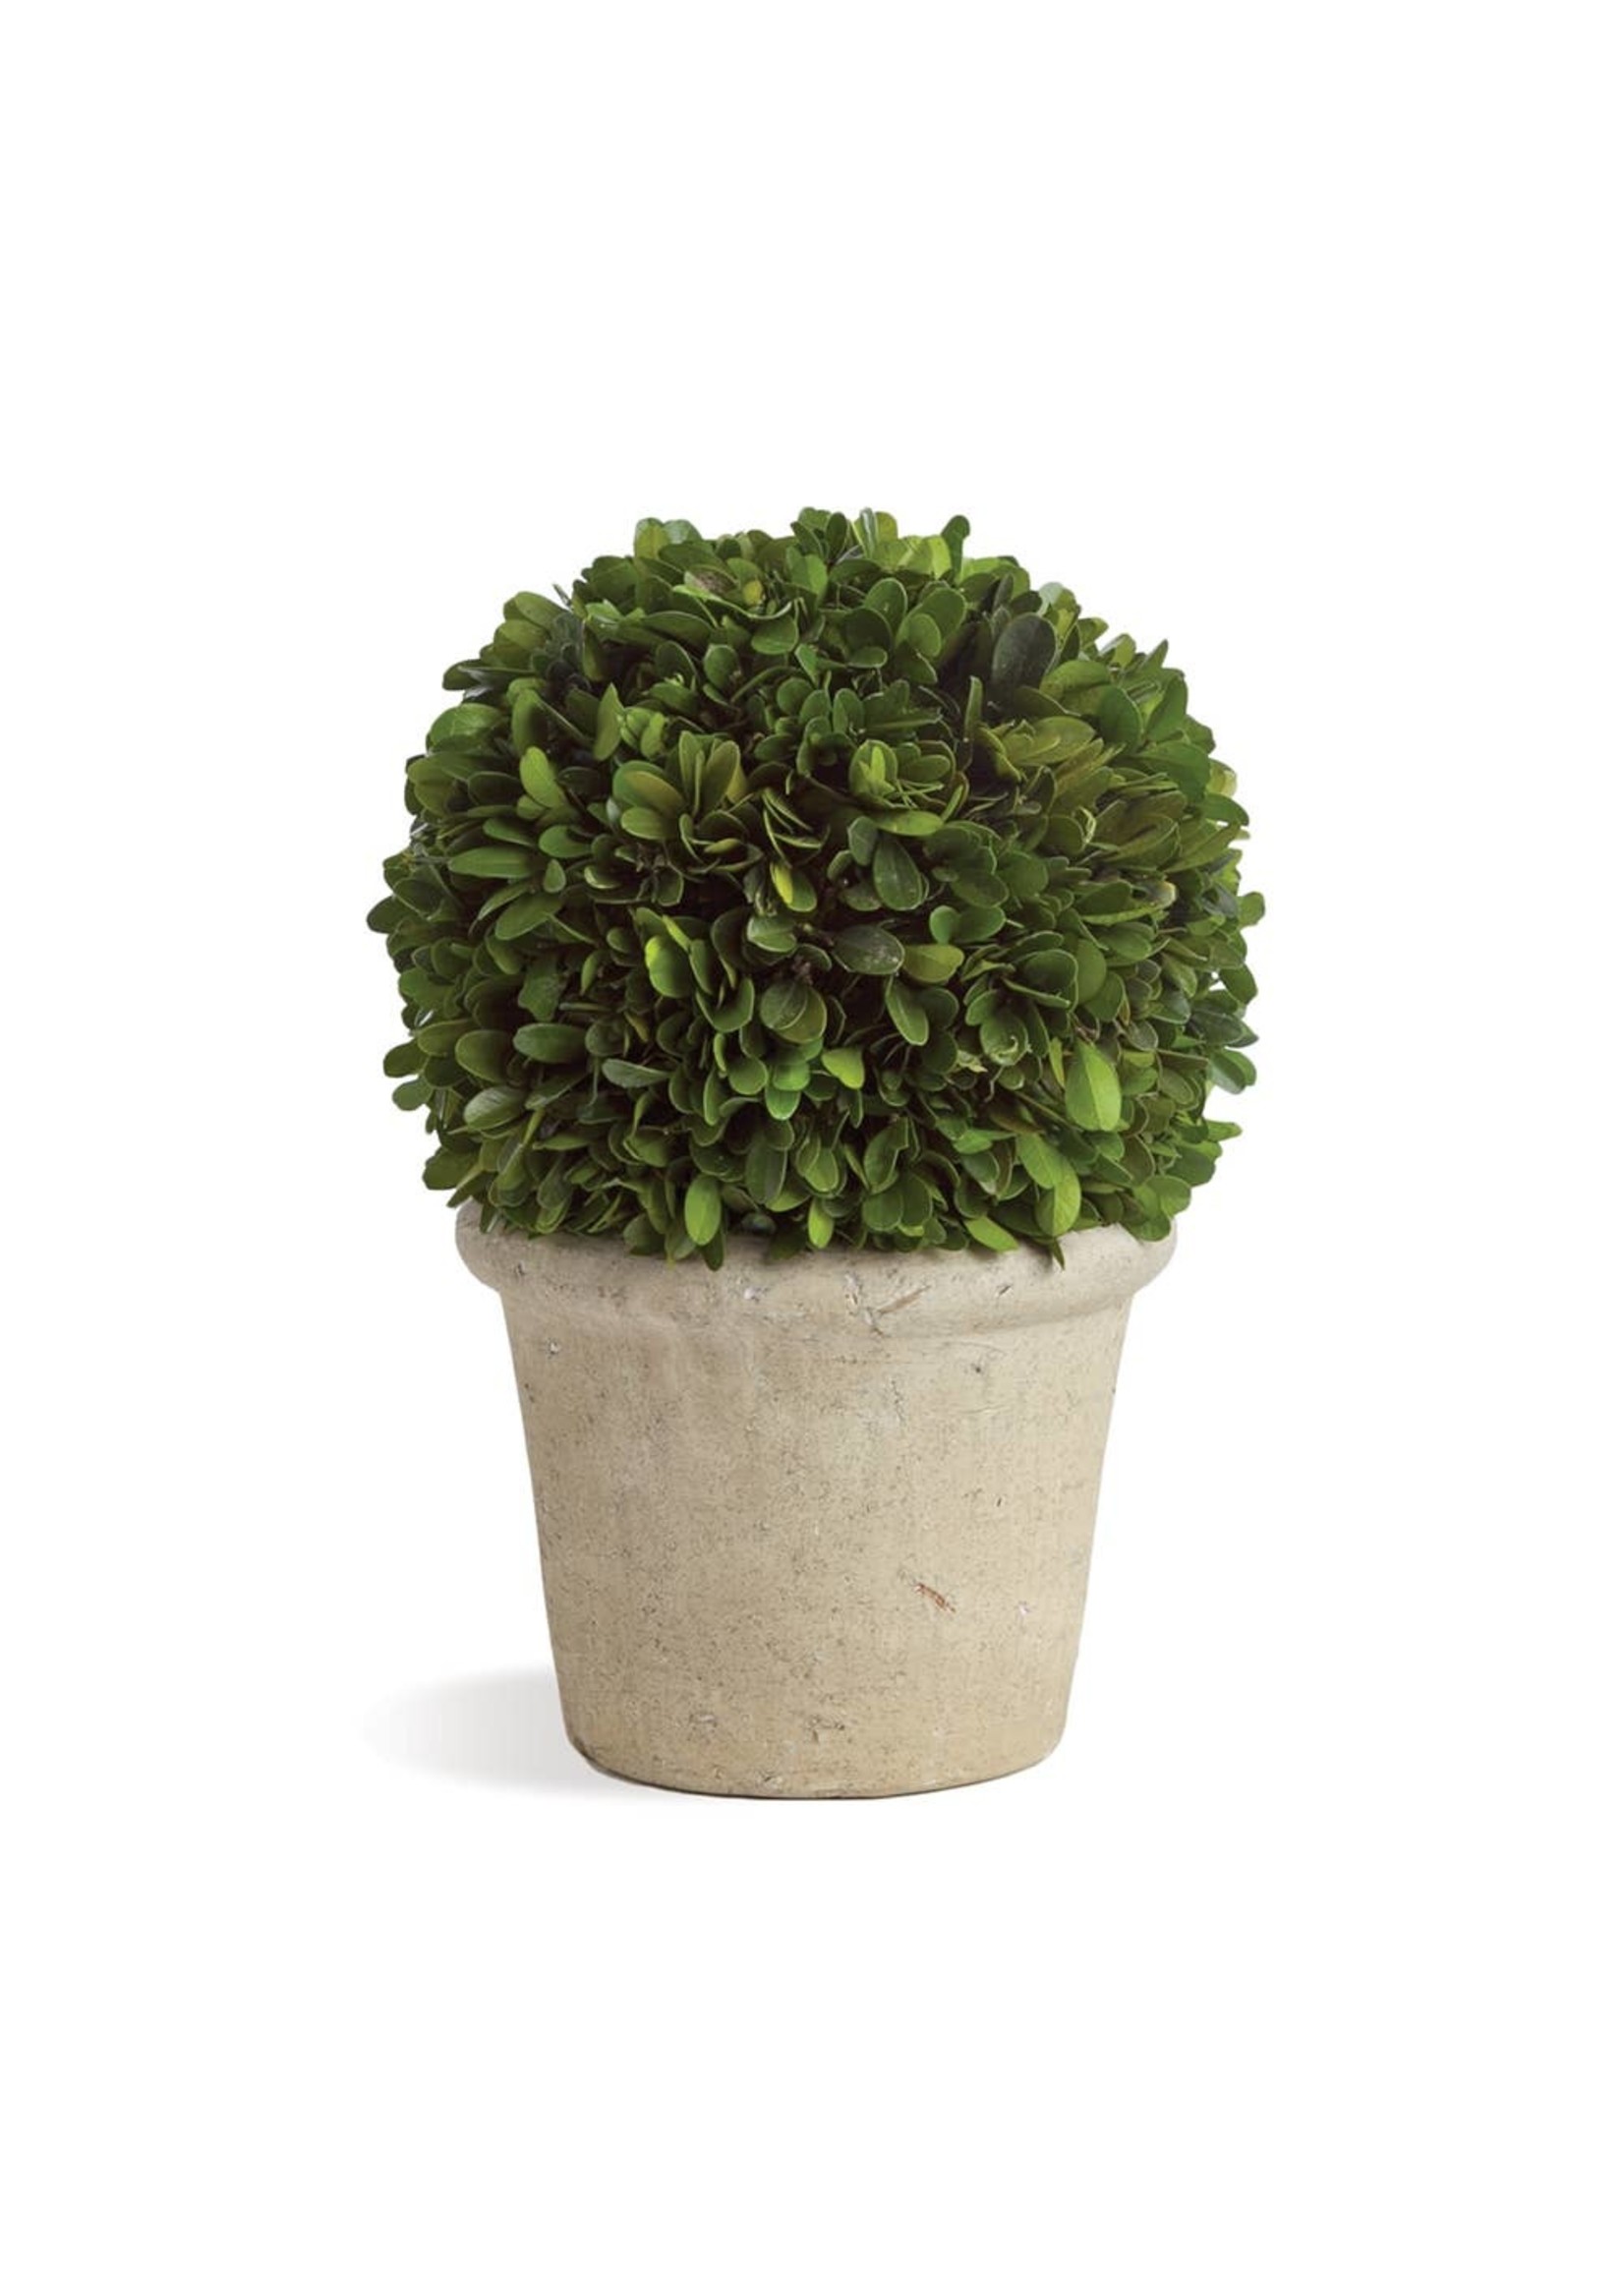 Boxwood Topiary - 8" Ball in Pot